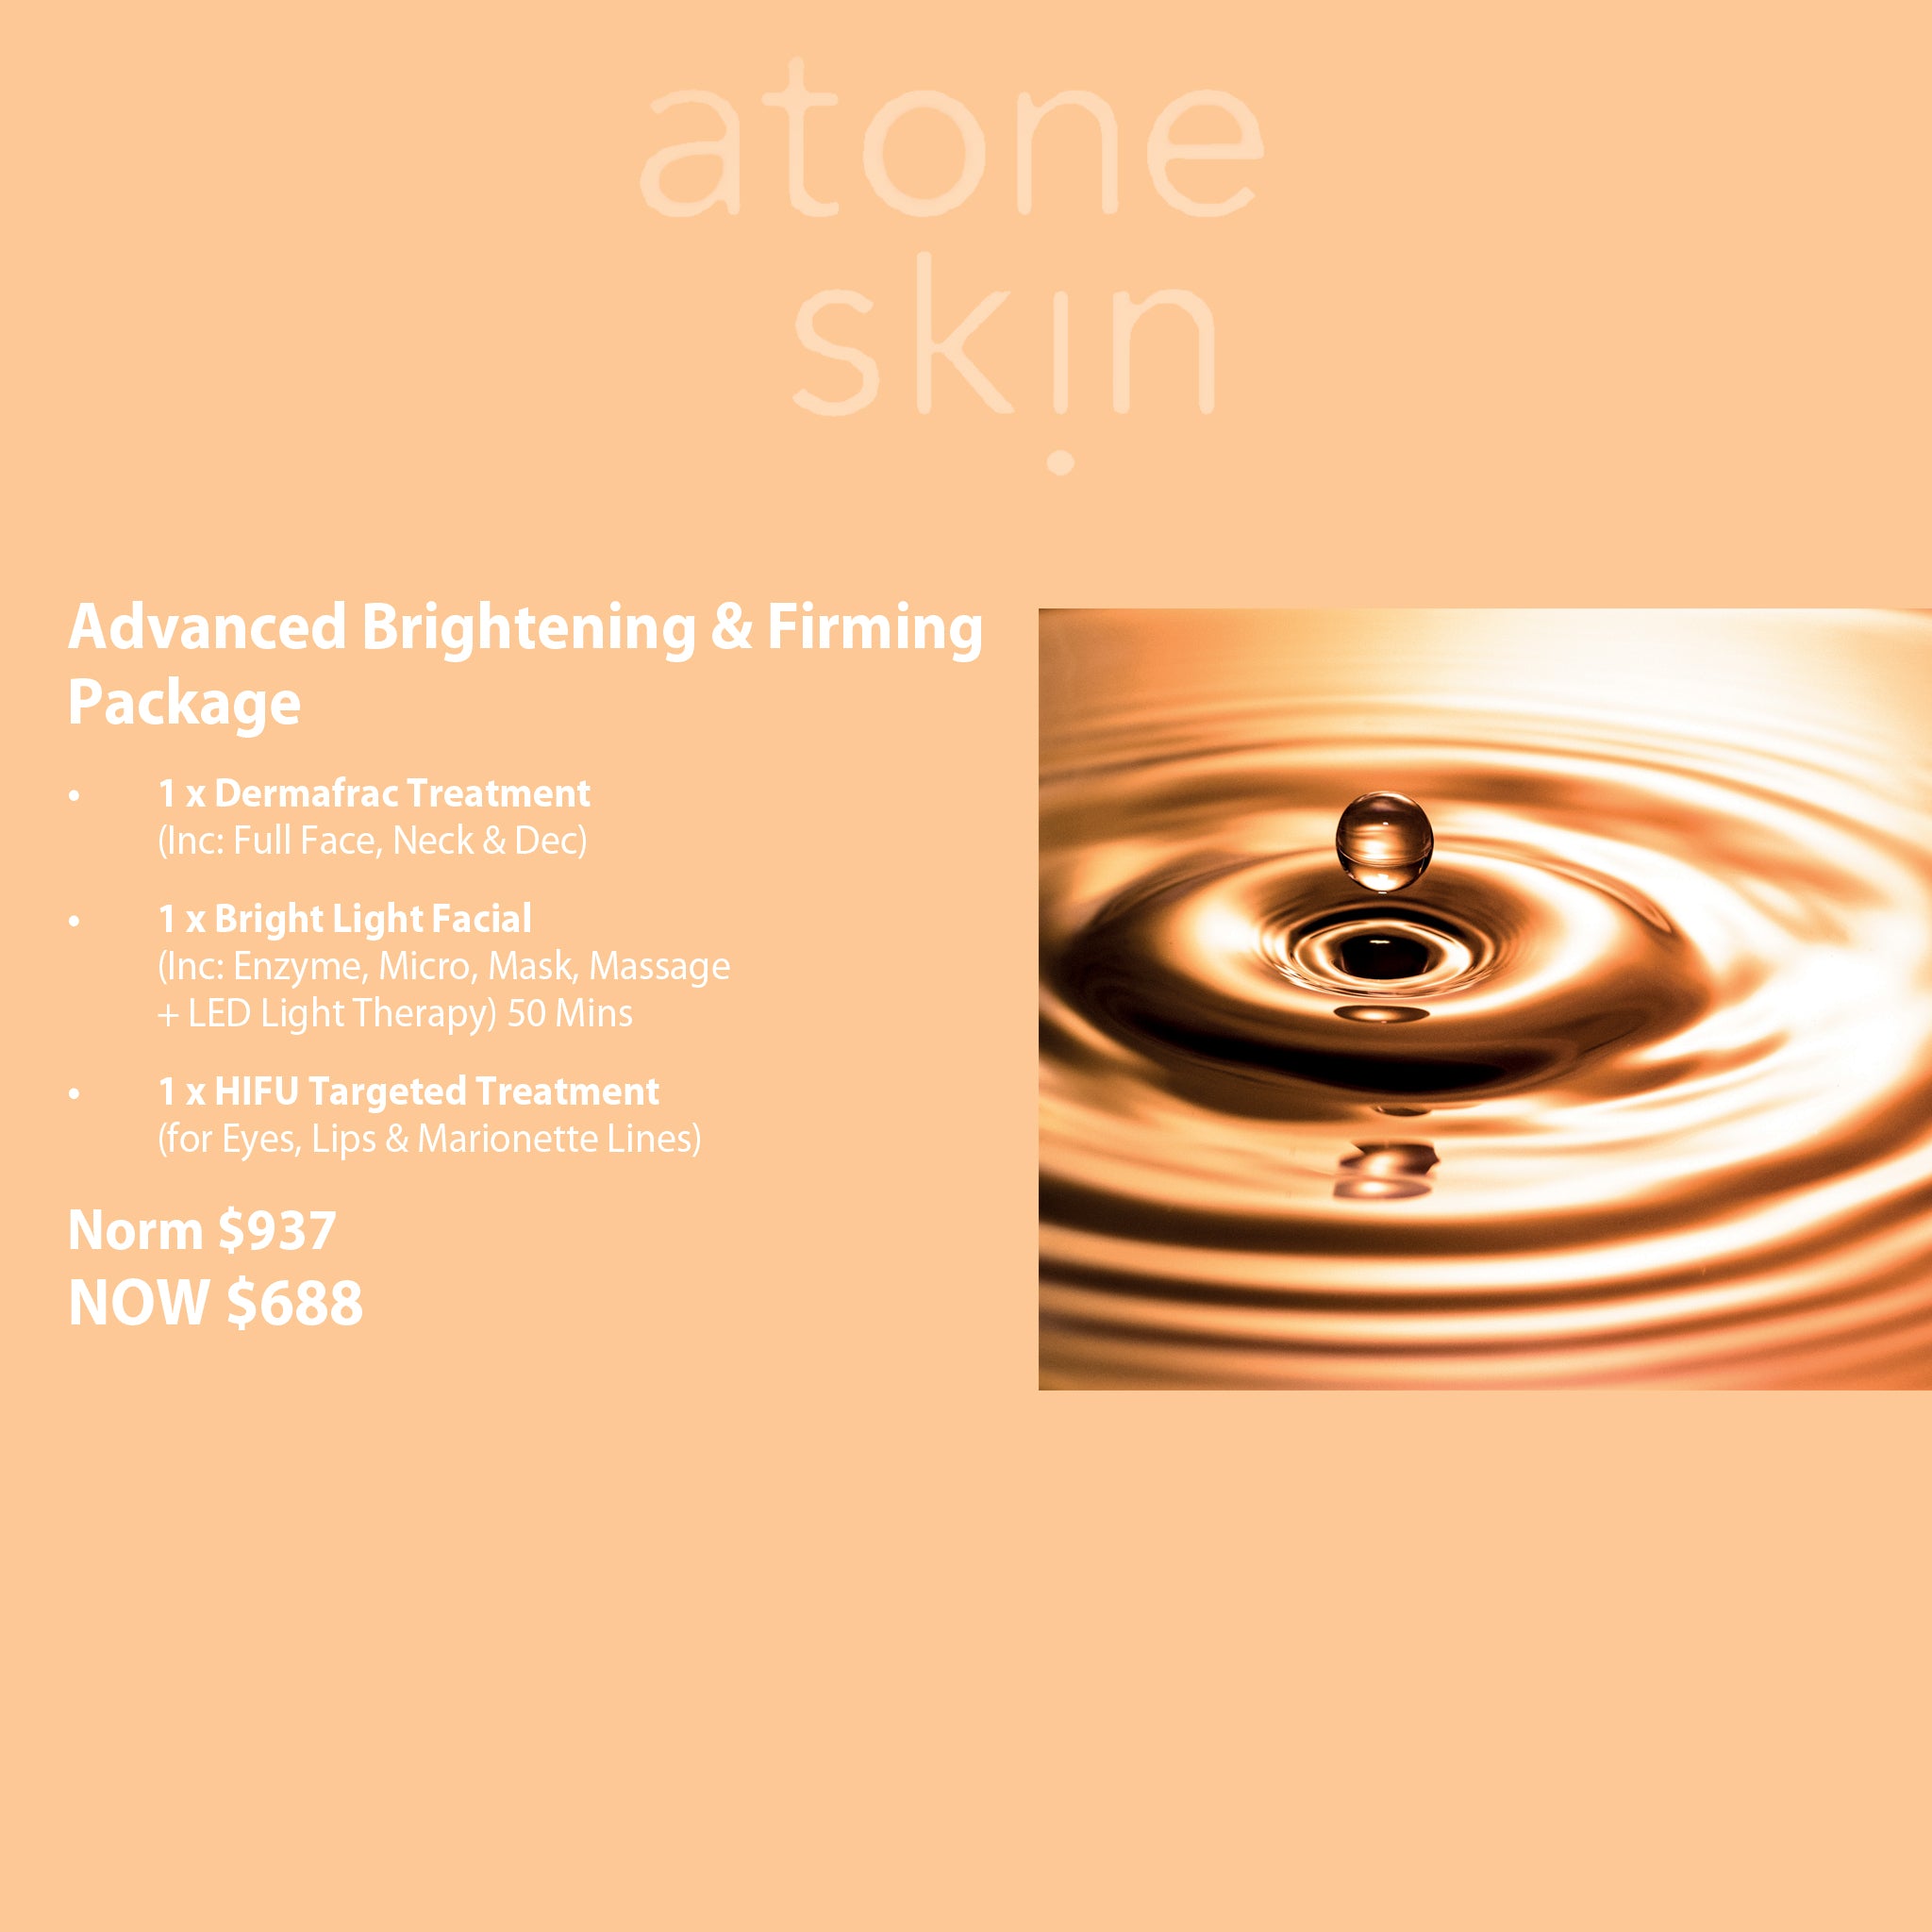 Advanced Brightening & Firming Package